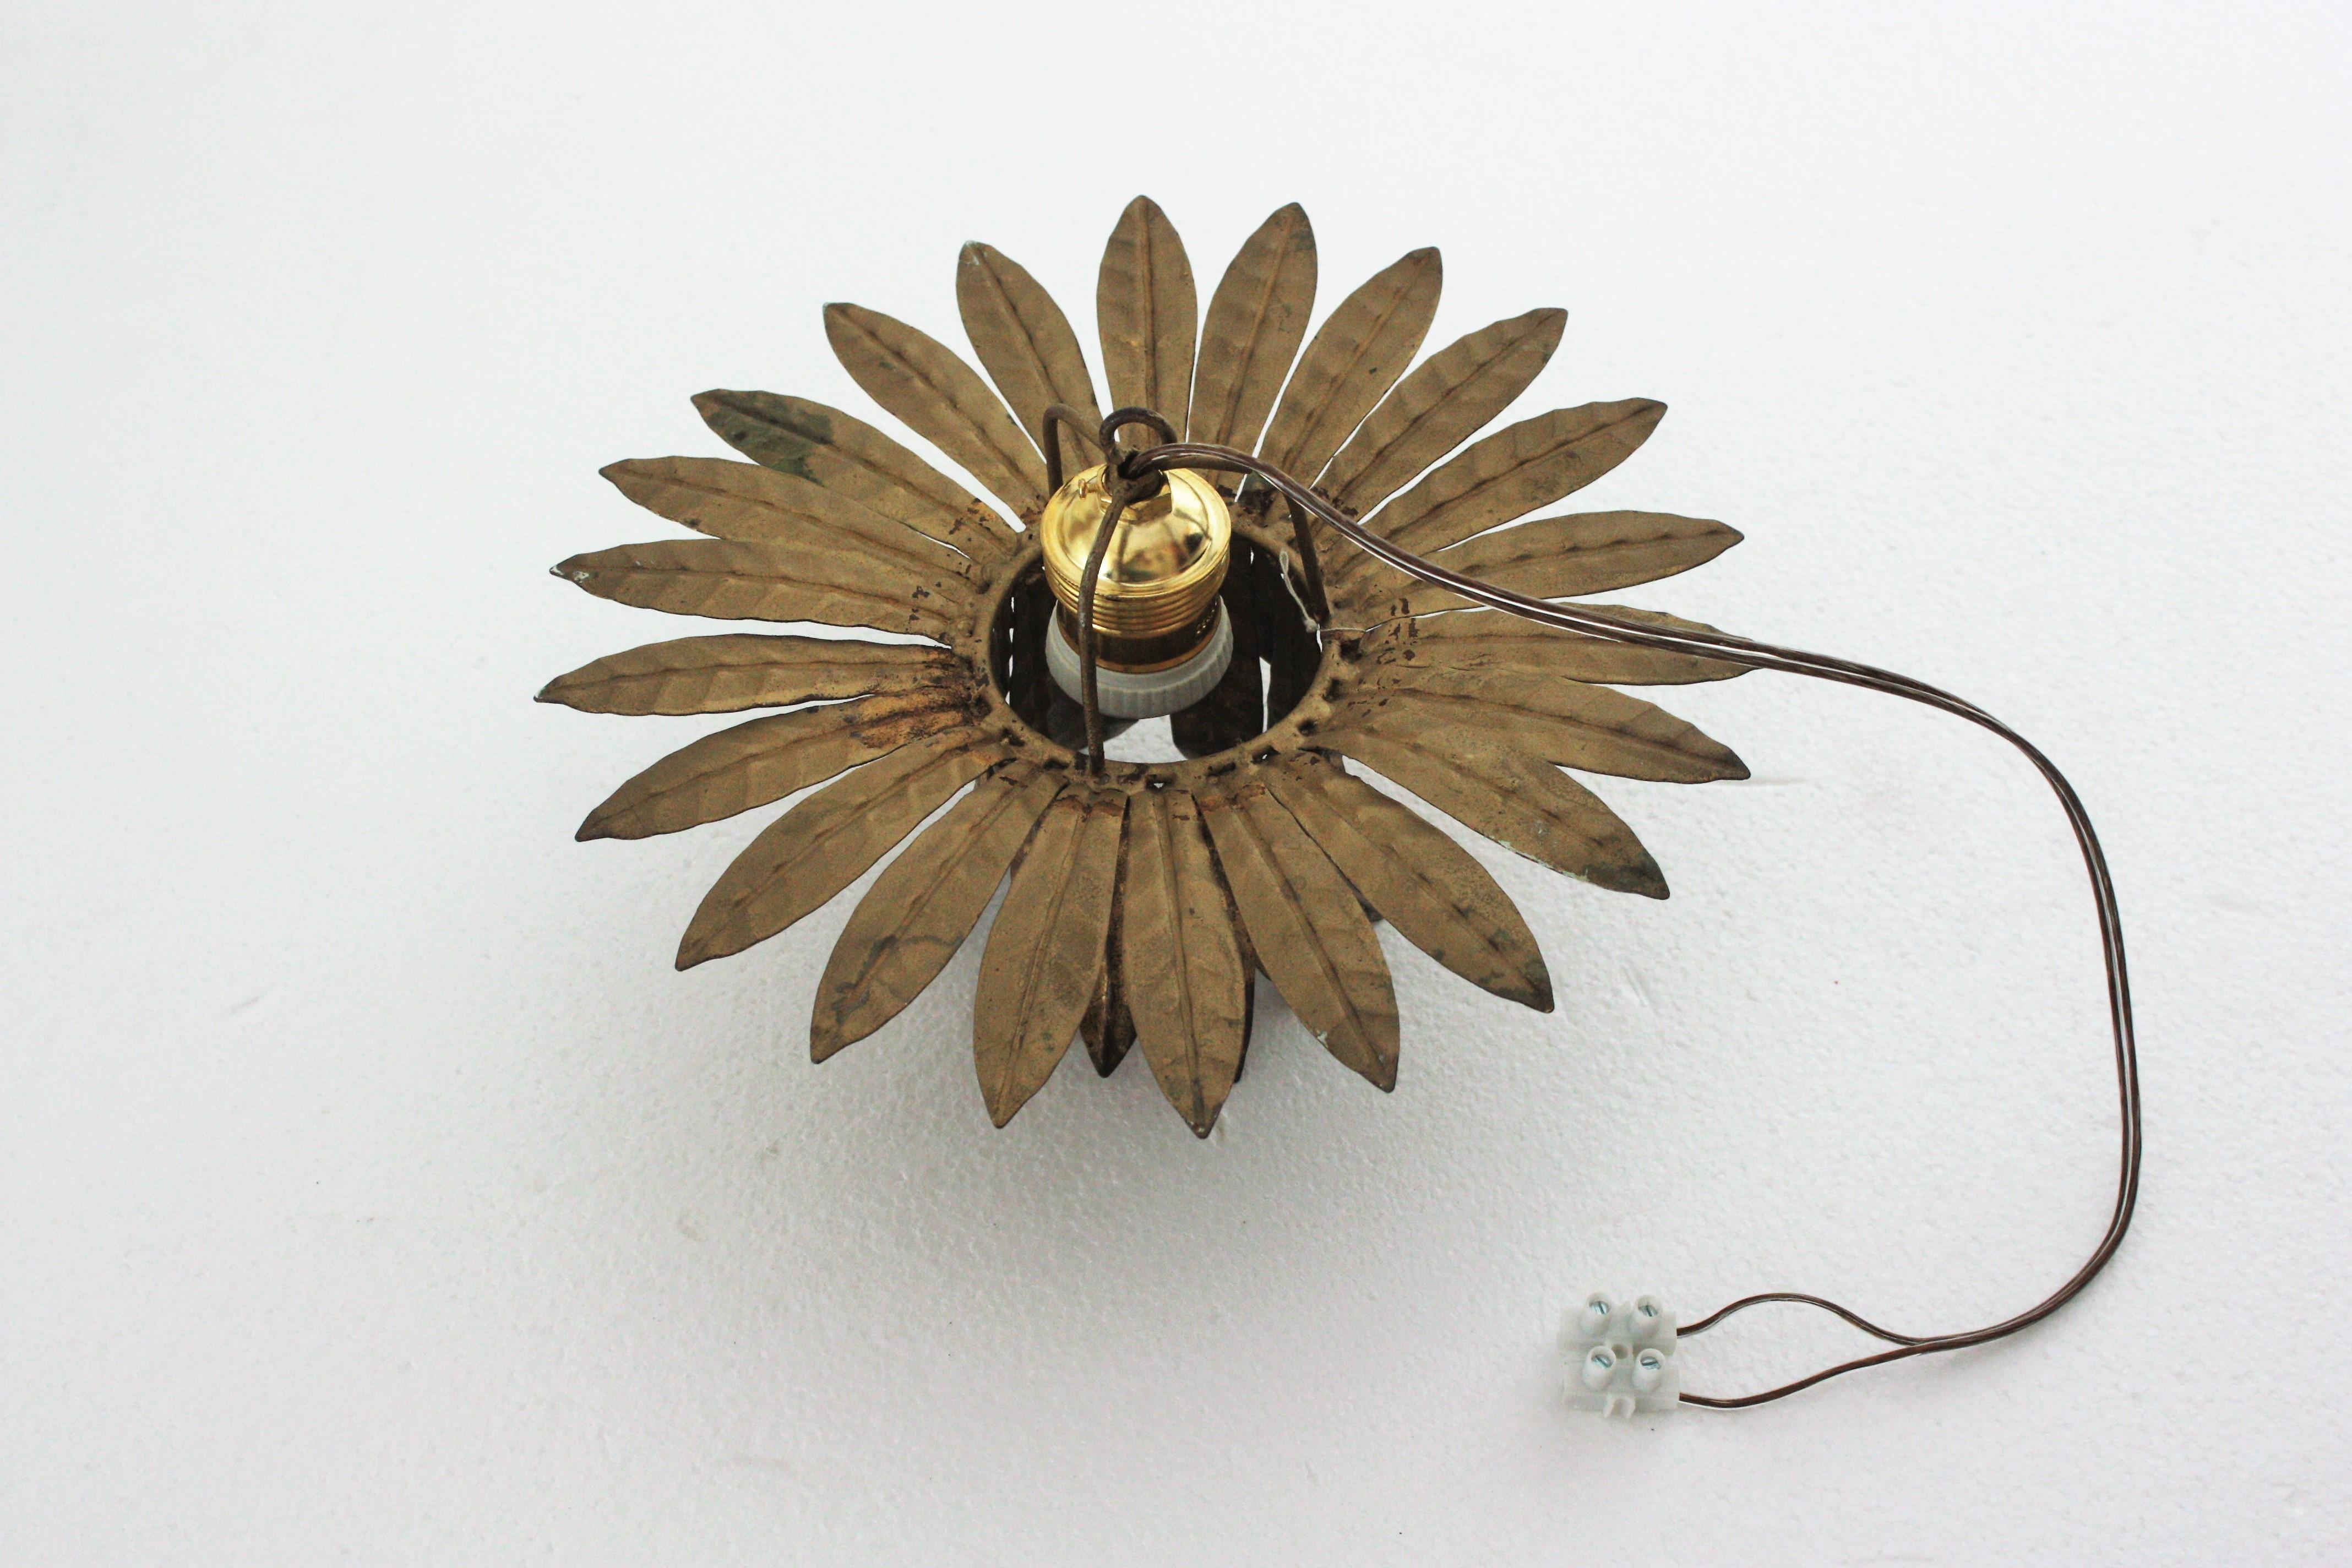 French Leaves Bouquet Crown Ceiling Light Fixture in Gilt Iron, 1940s For Sale 9